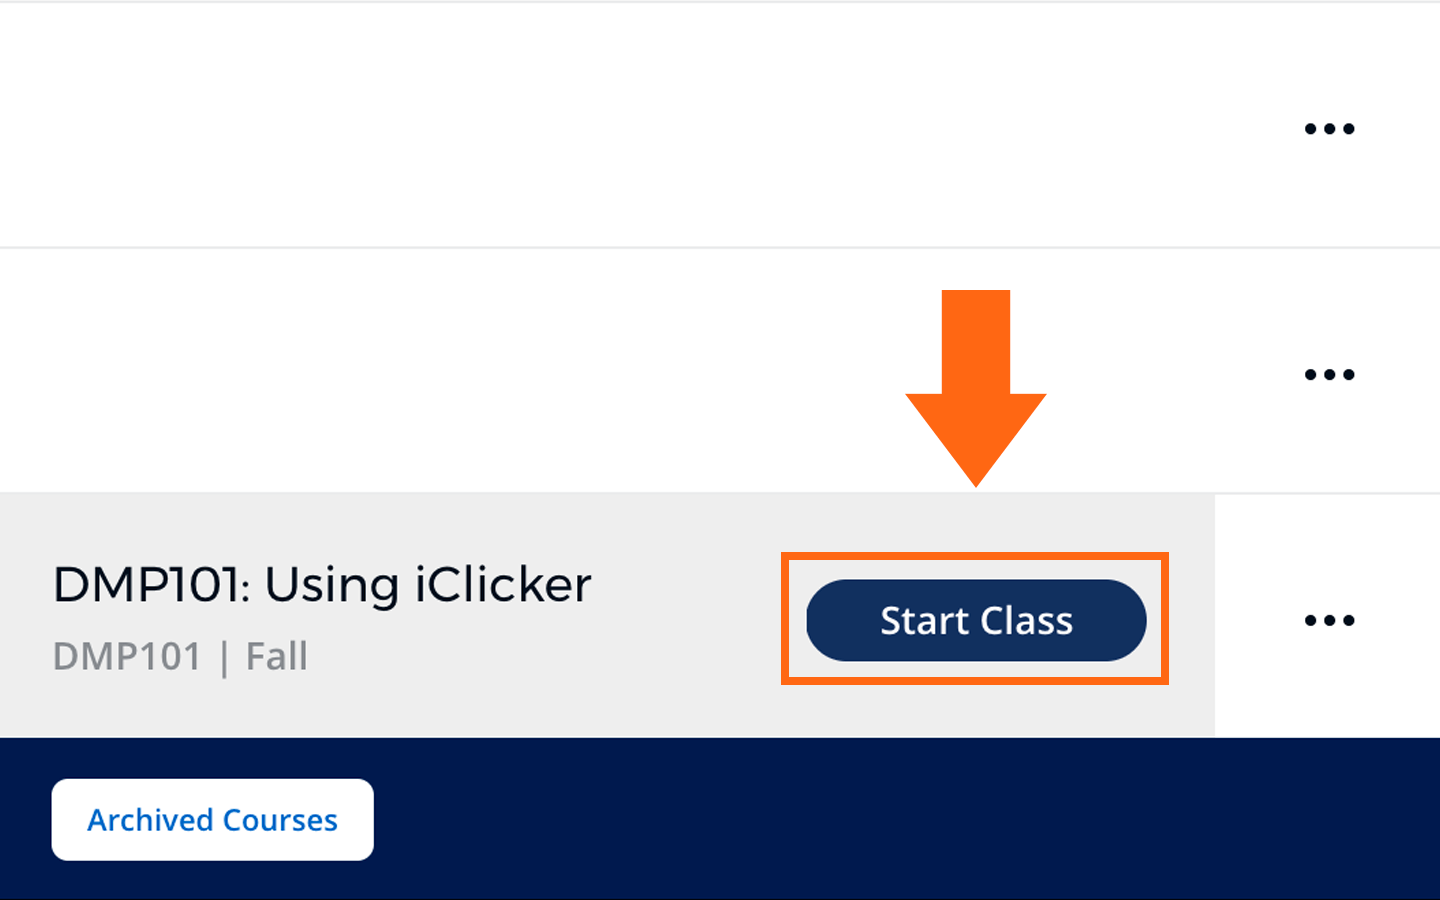 Click start class when you are ready to begin a session in iClicker Cloud